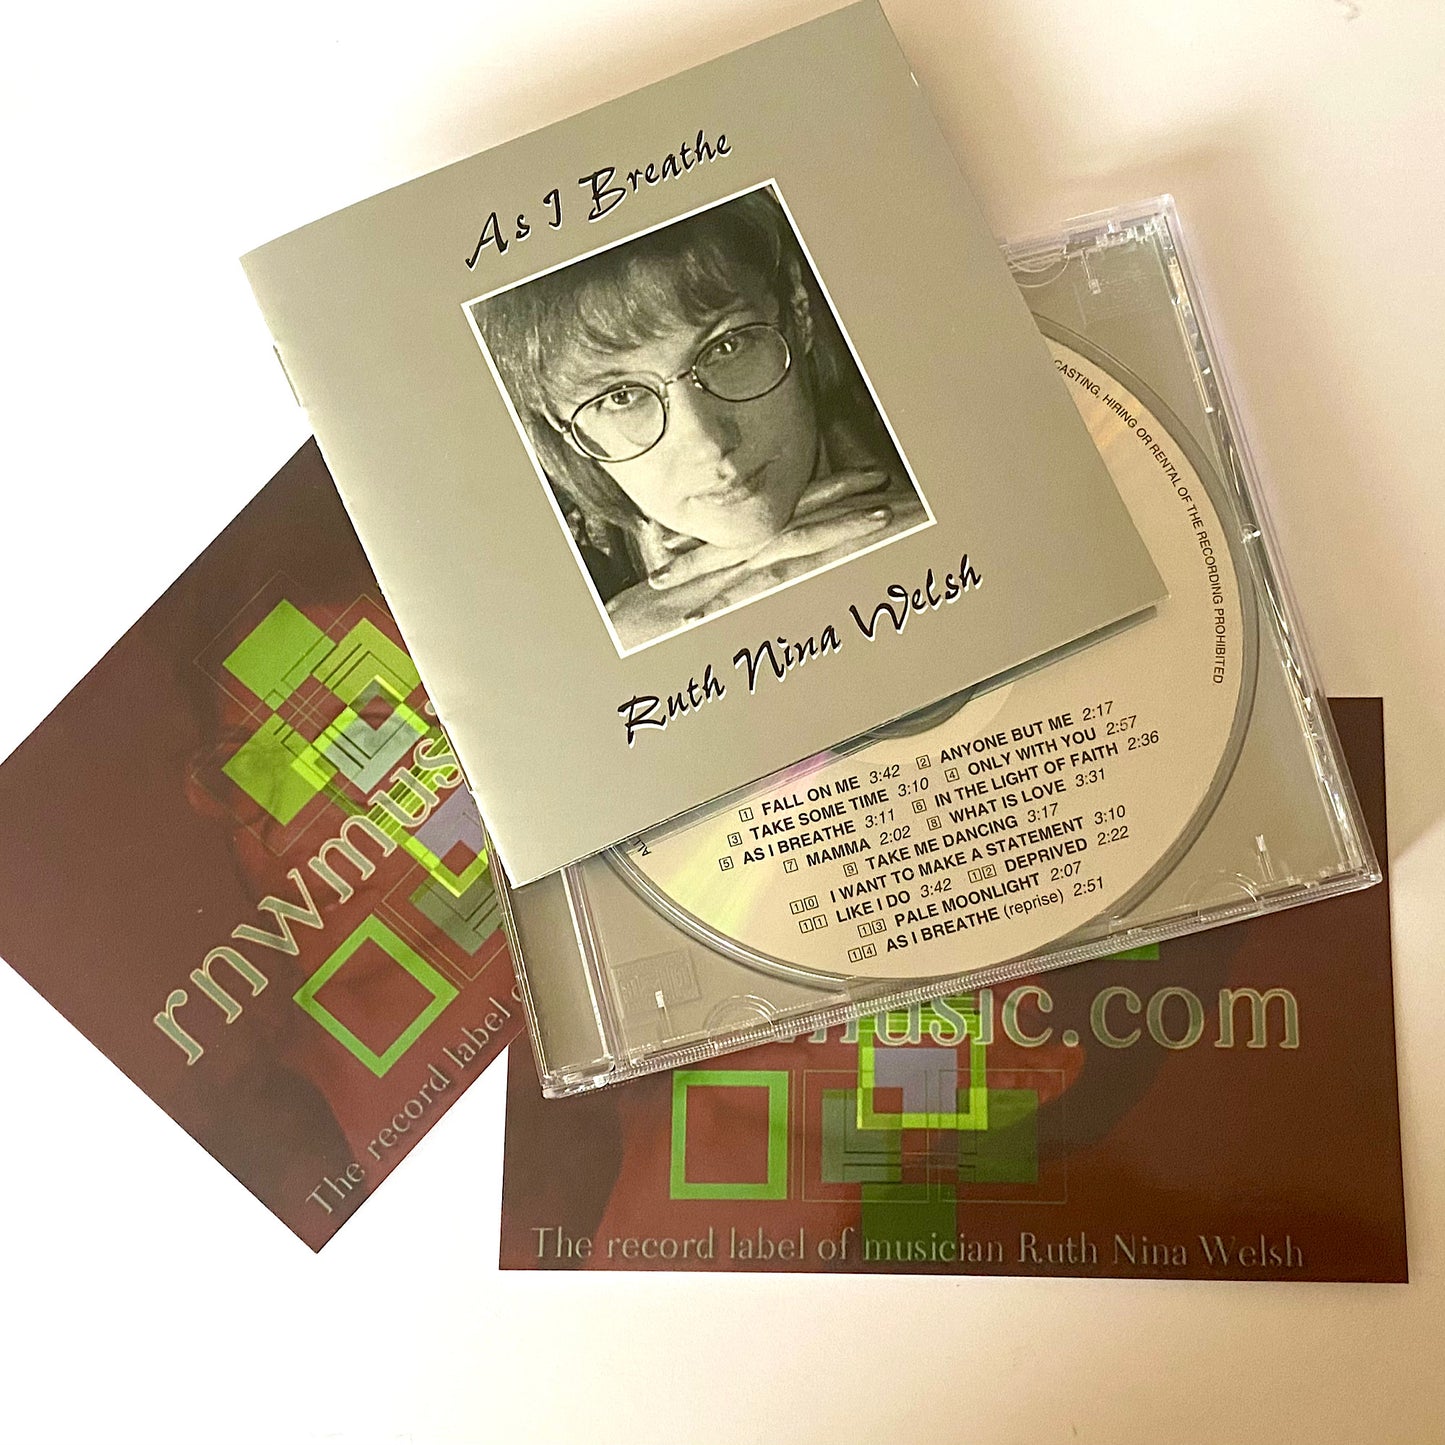 As I Breathe (2000, Collectors Album) Signed CD & Promo Cards